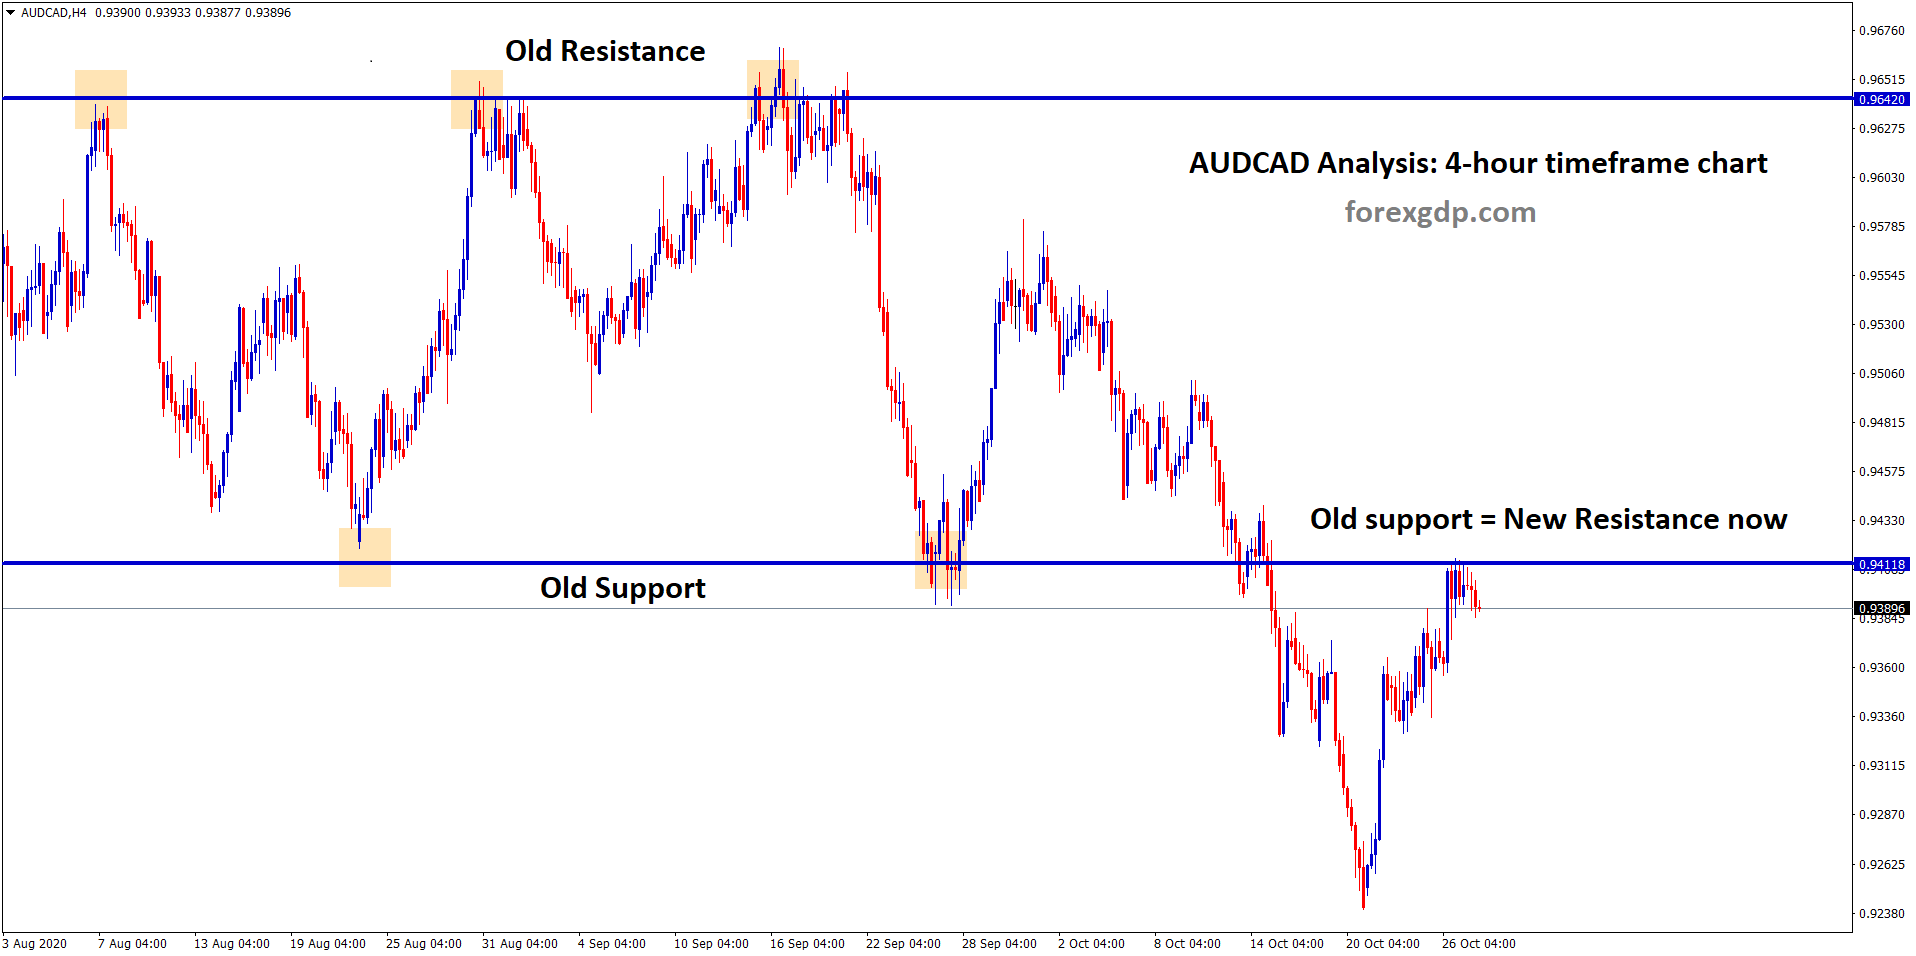 AUDCAD support converted into new resistance level now